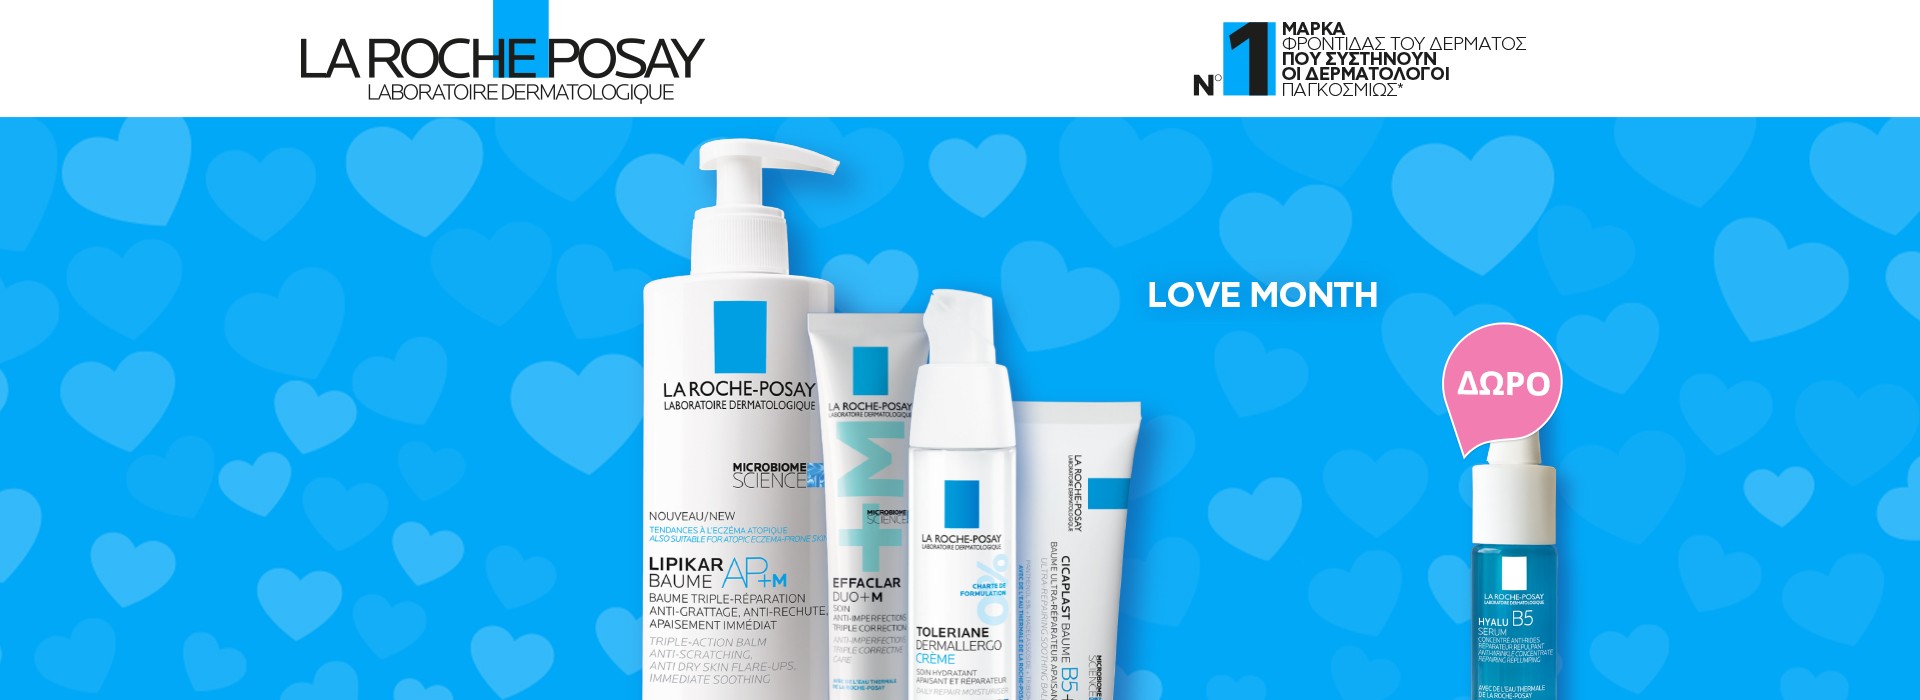 With purchases of 2 La Roche Posay products,